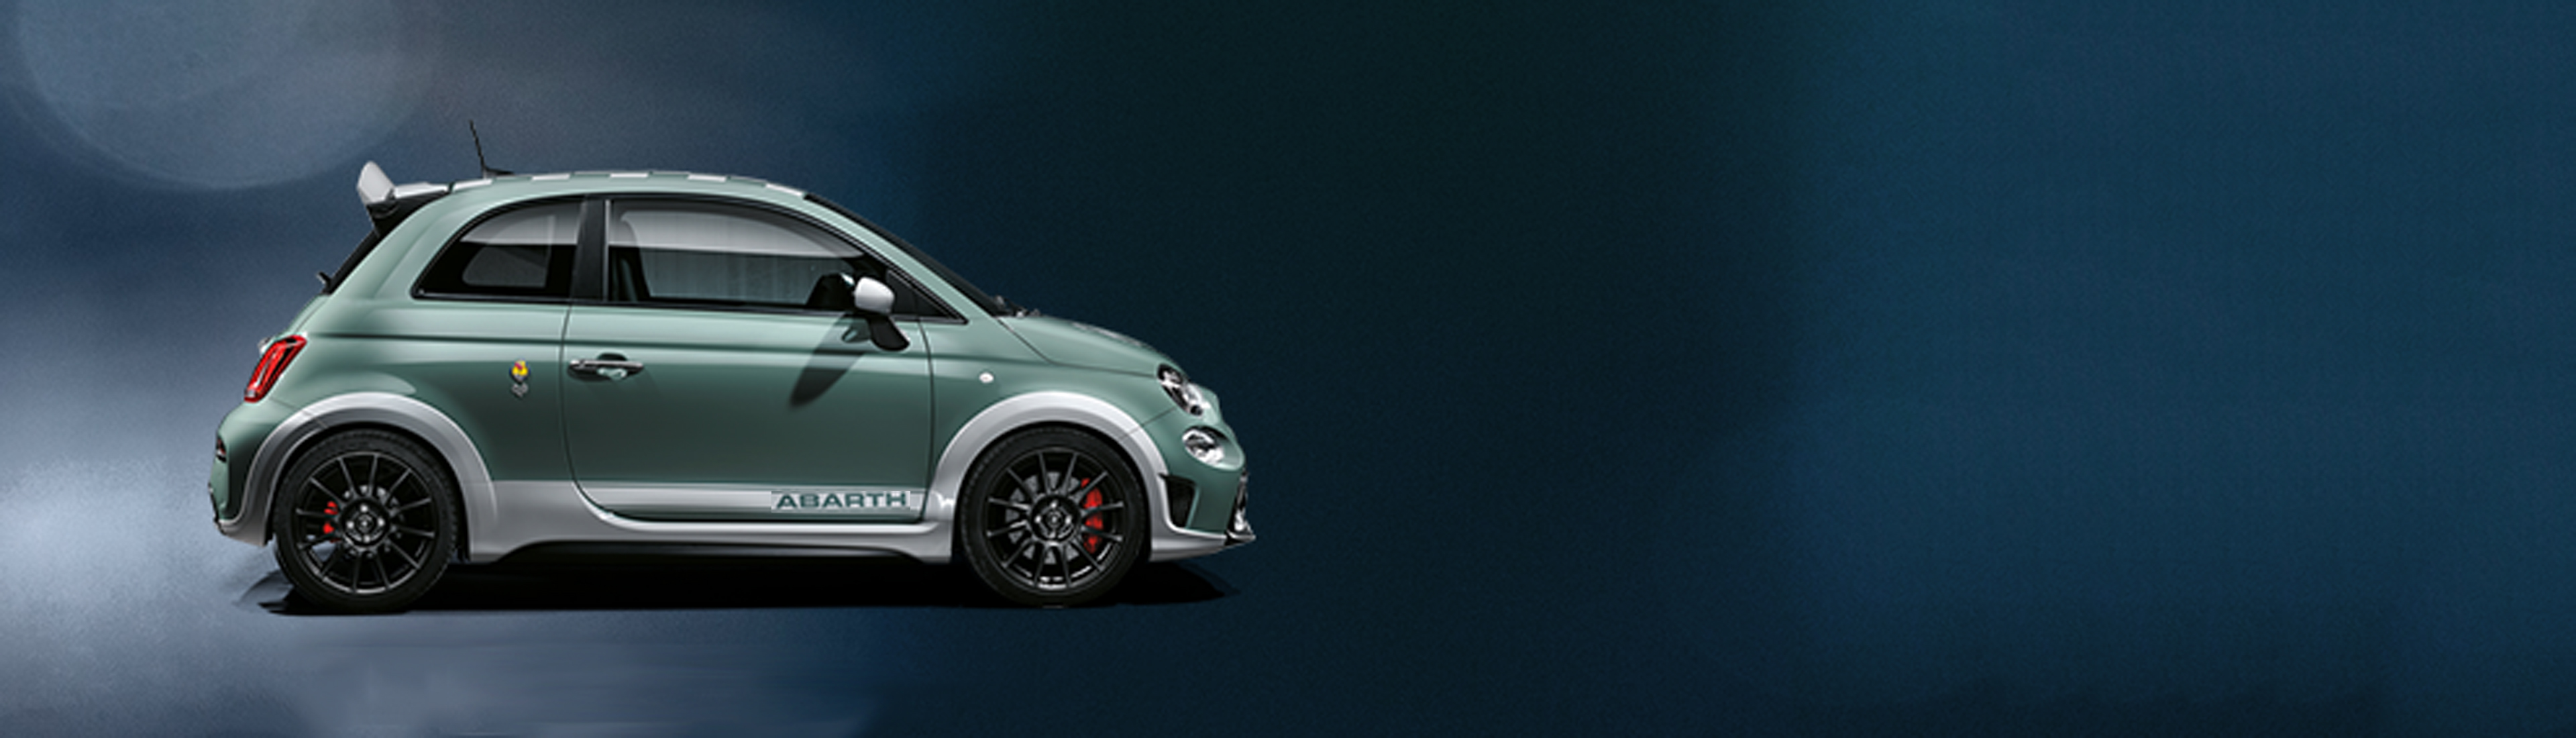 Latest Abarth business Offers